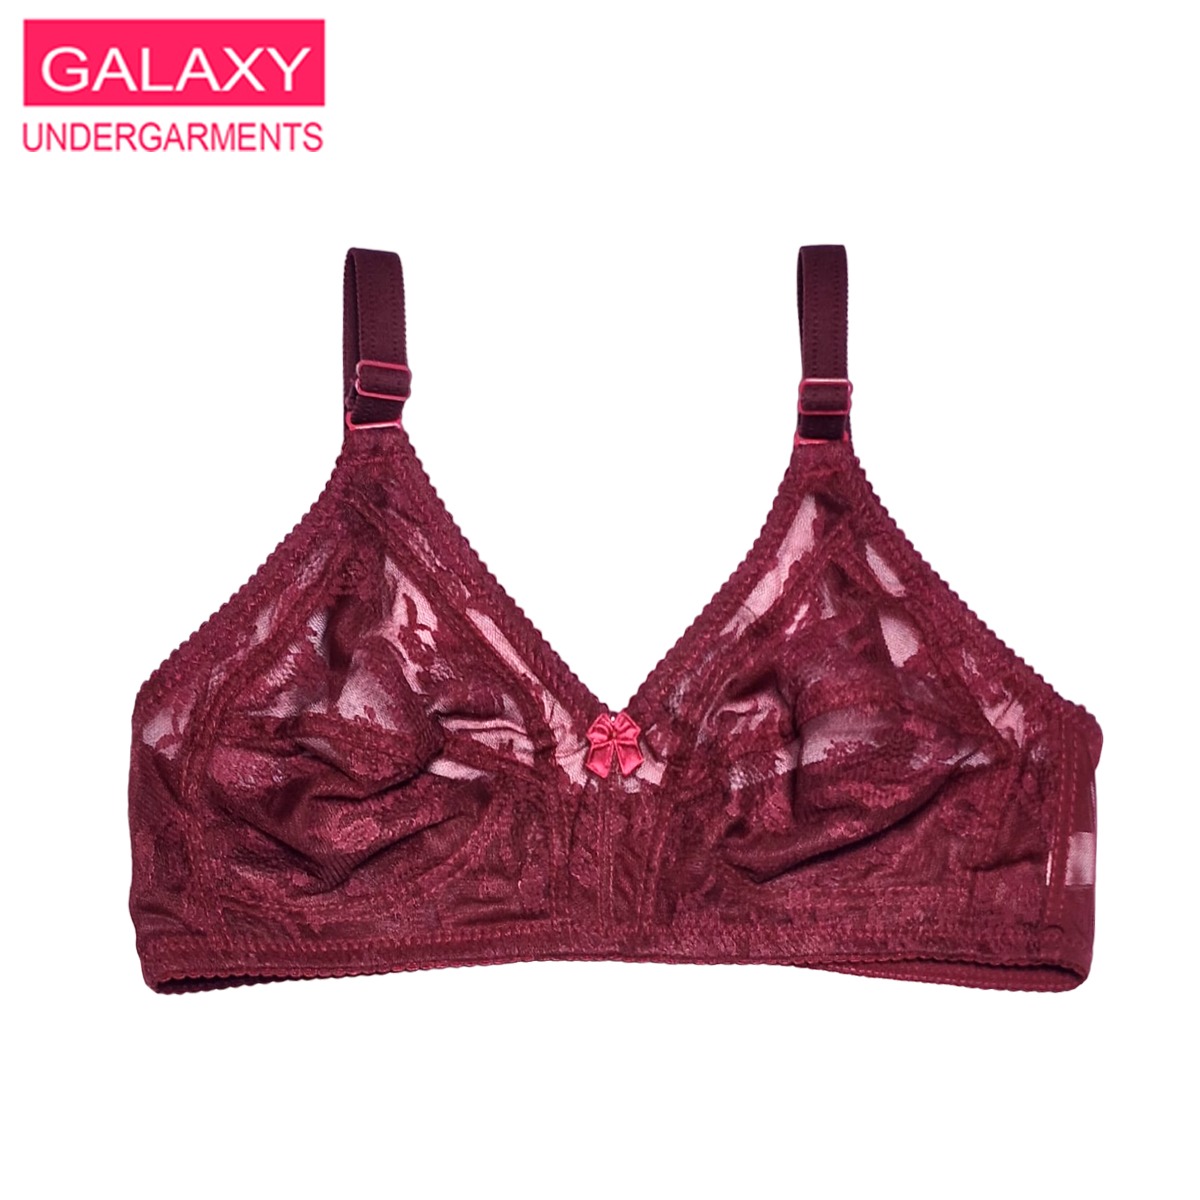 Galaxy Undergarments Pakistan - Galaxy original half net design bra d cup💕  Available sizes 32 D to 42 D 4 colours each size( blue, red, skin, Dark  pink)  #panty  #undergarments #womenundergarments #